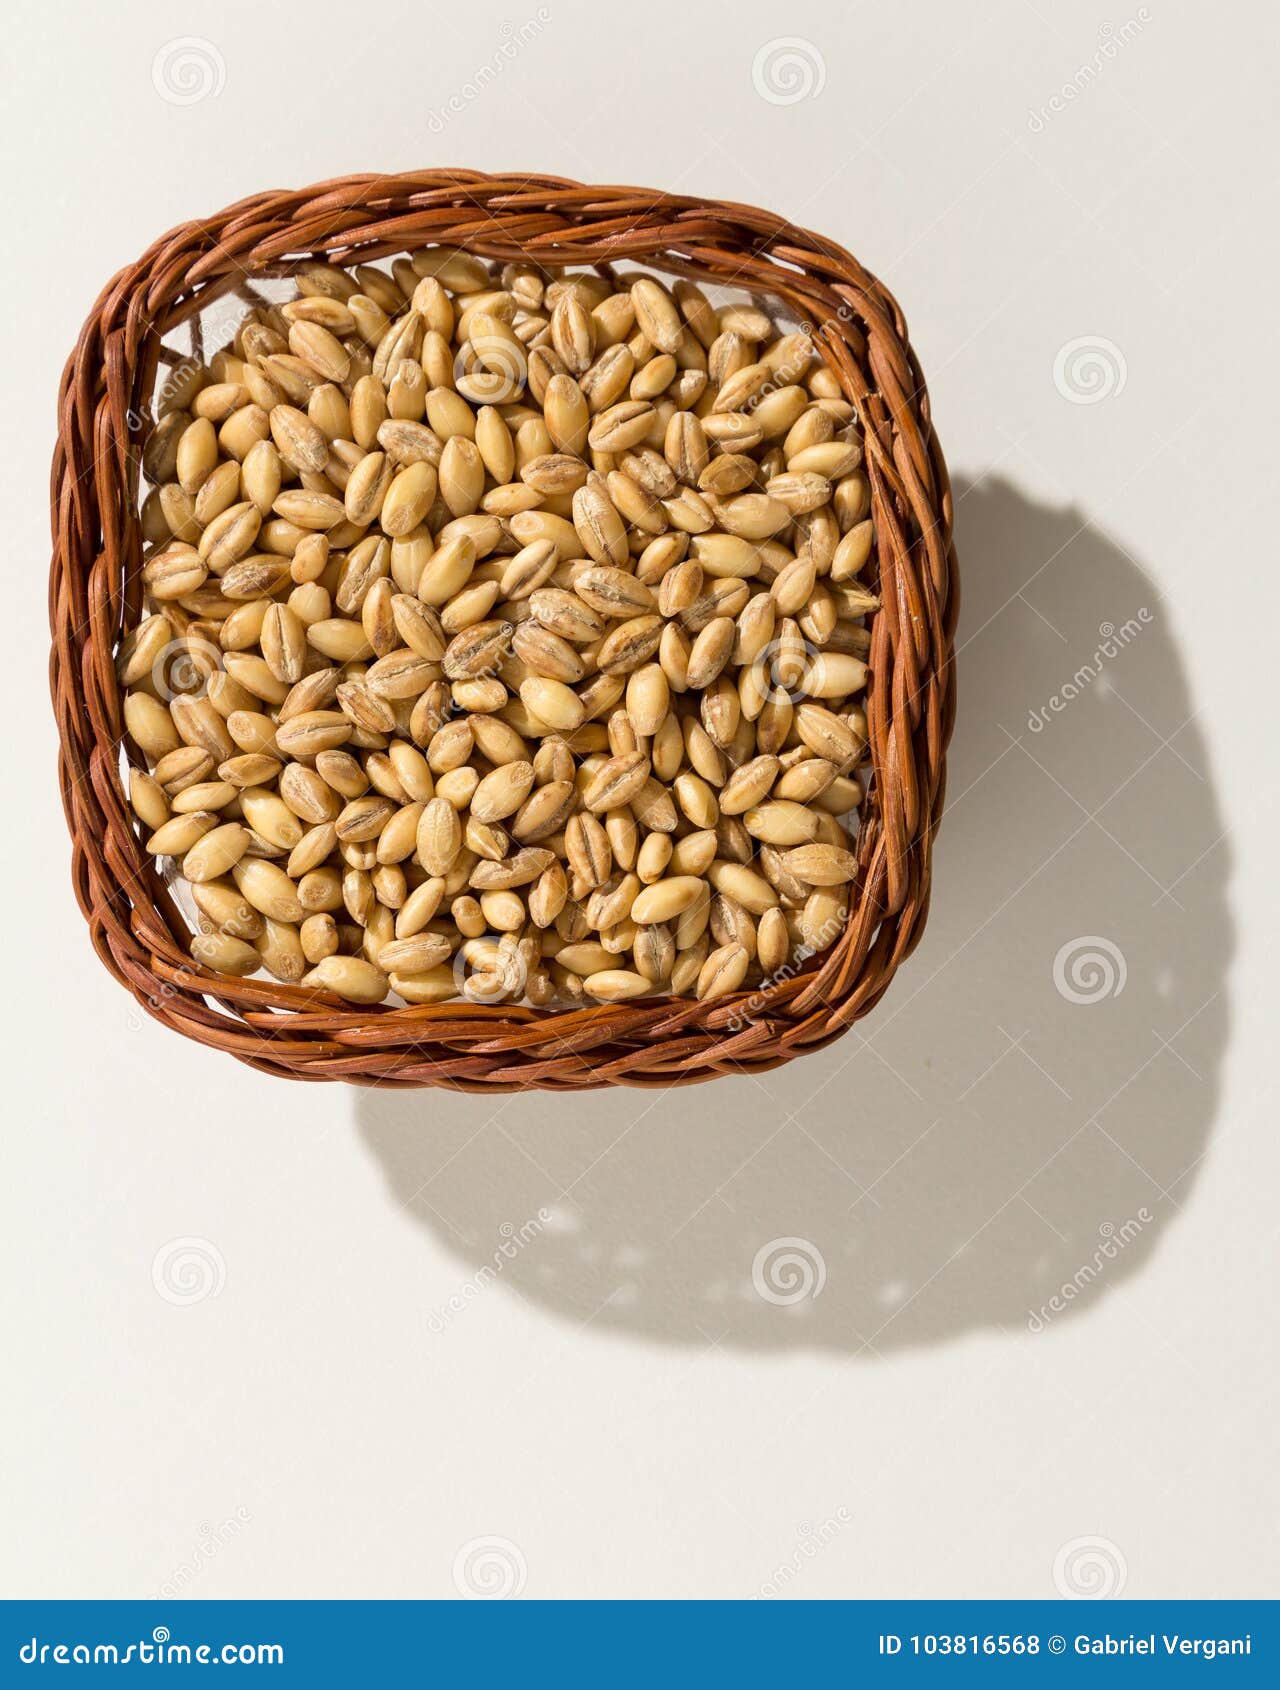 barley cereal grain. wicker basket with grains. top view, hard l